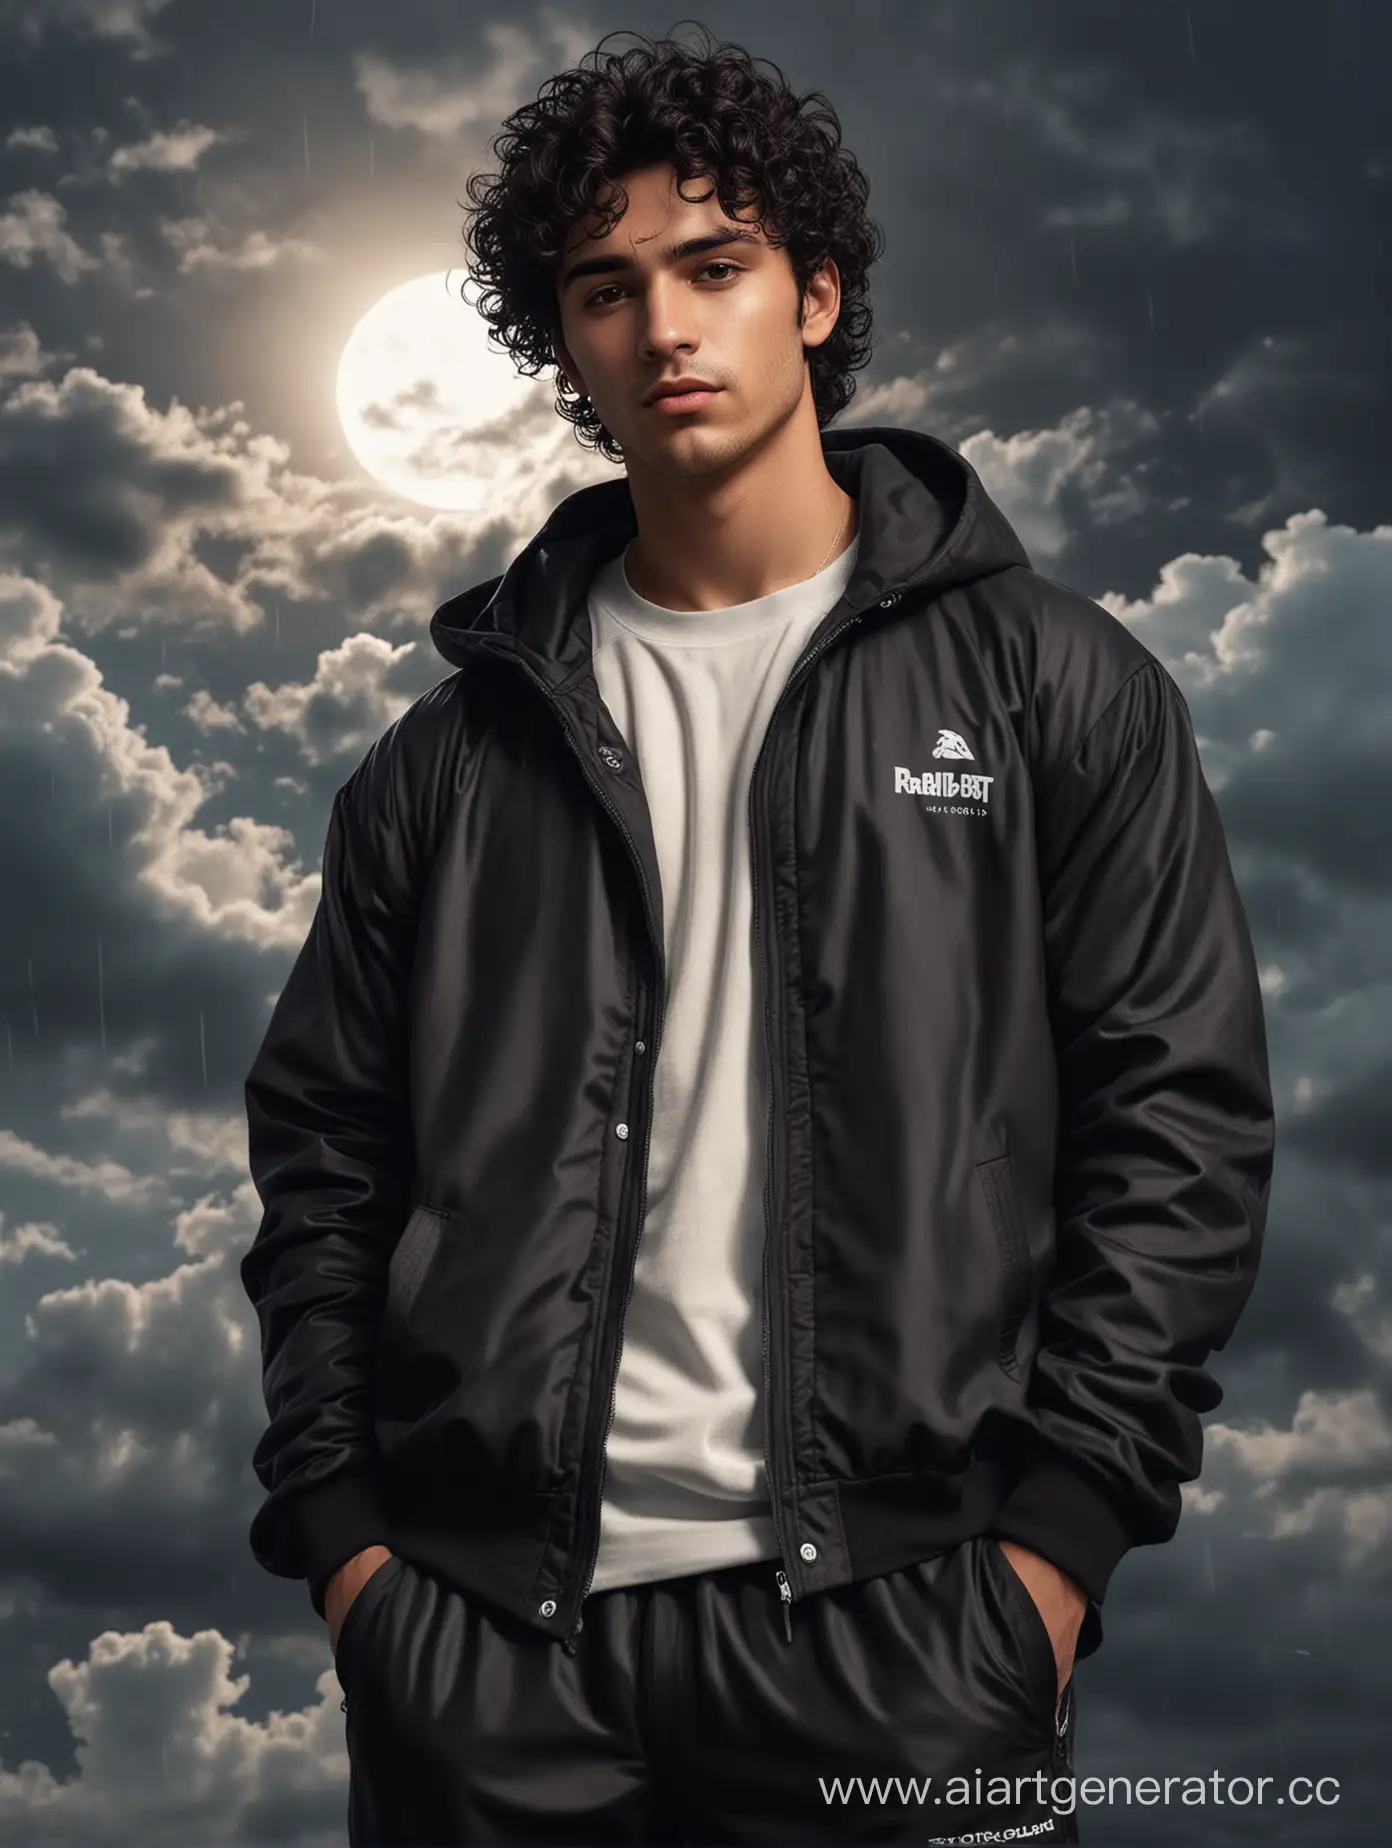 Young-Bad-Boy-in-Cool-Tracksuit-Under-Moonlit-Rainy-Sky